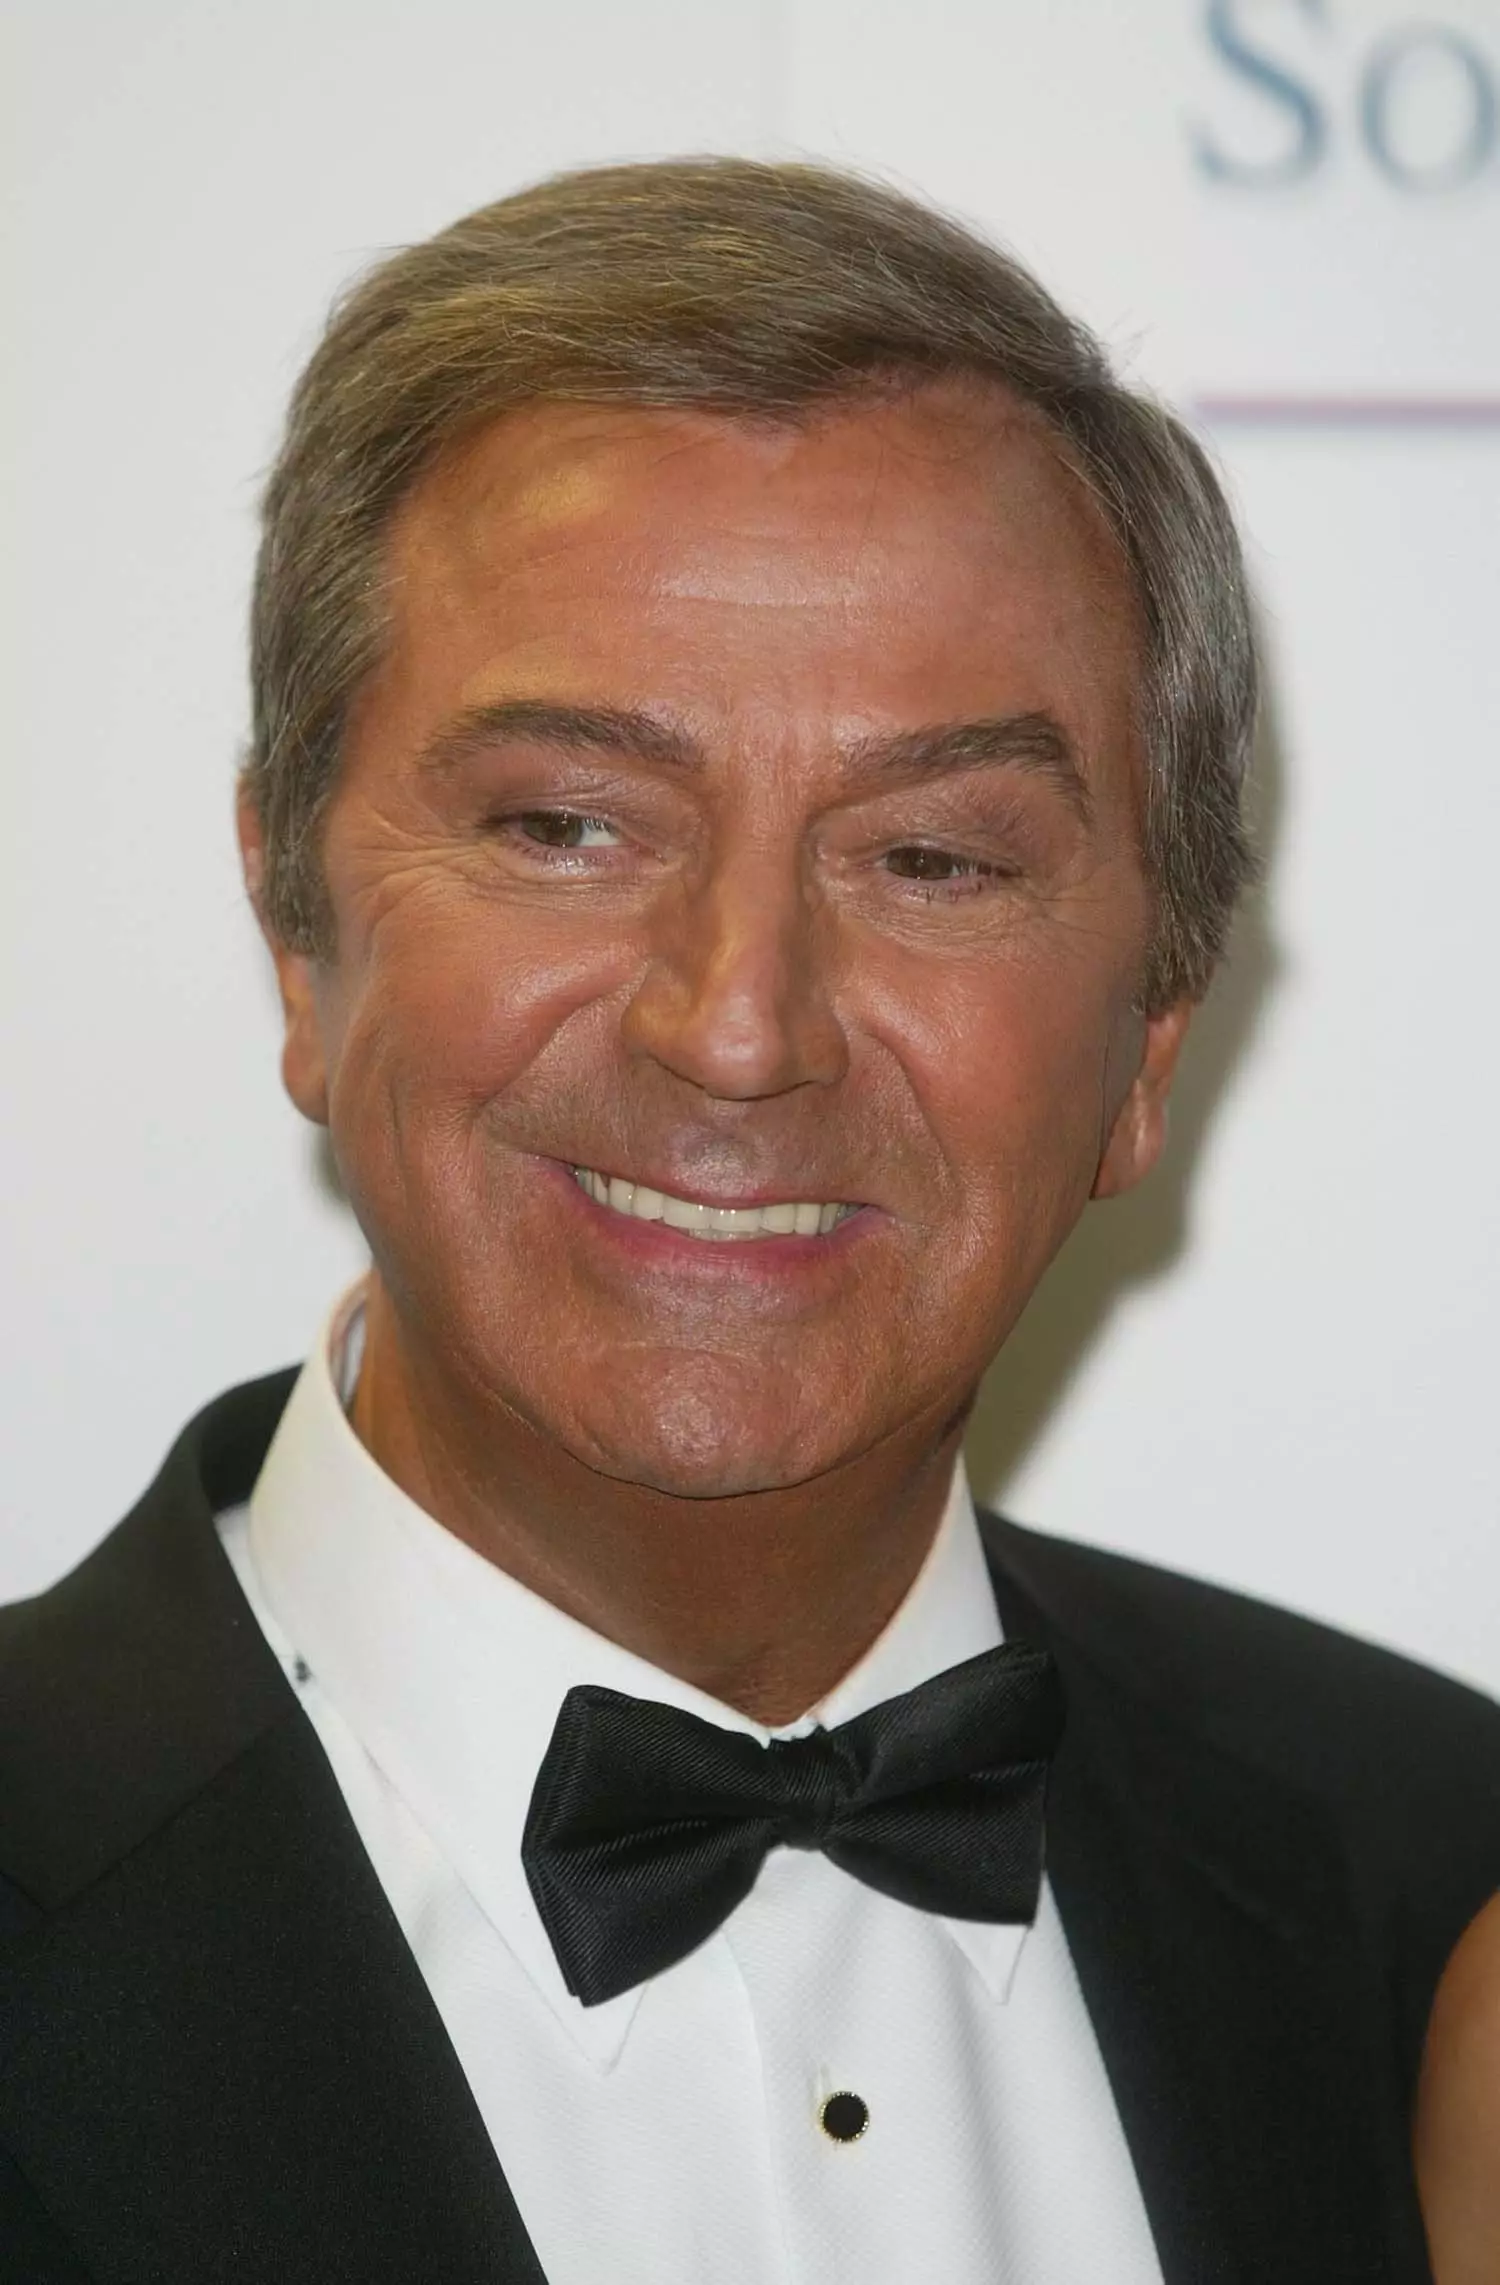 Des O'Connor has passed away at the age of 88.